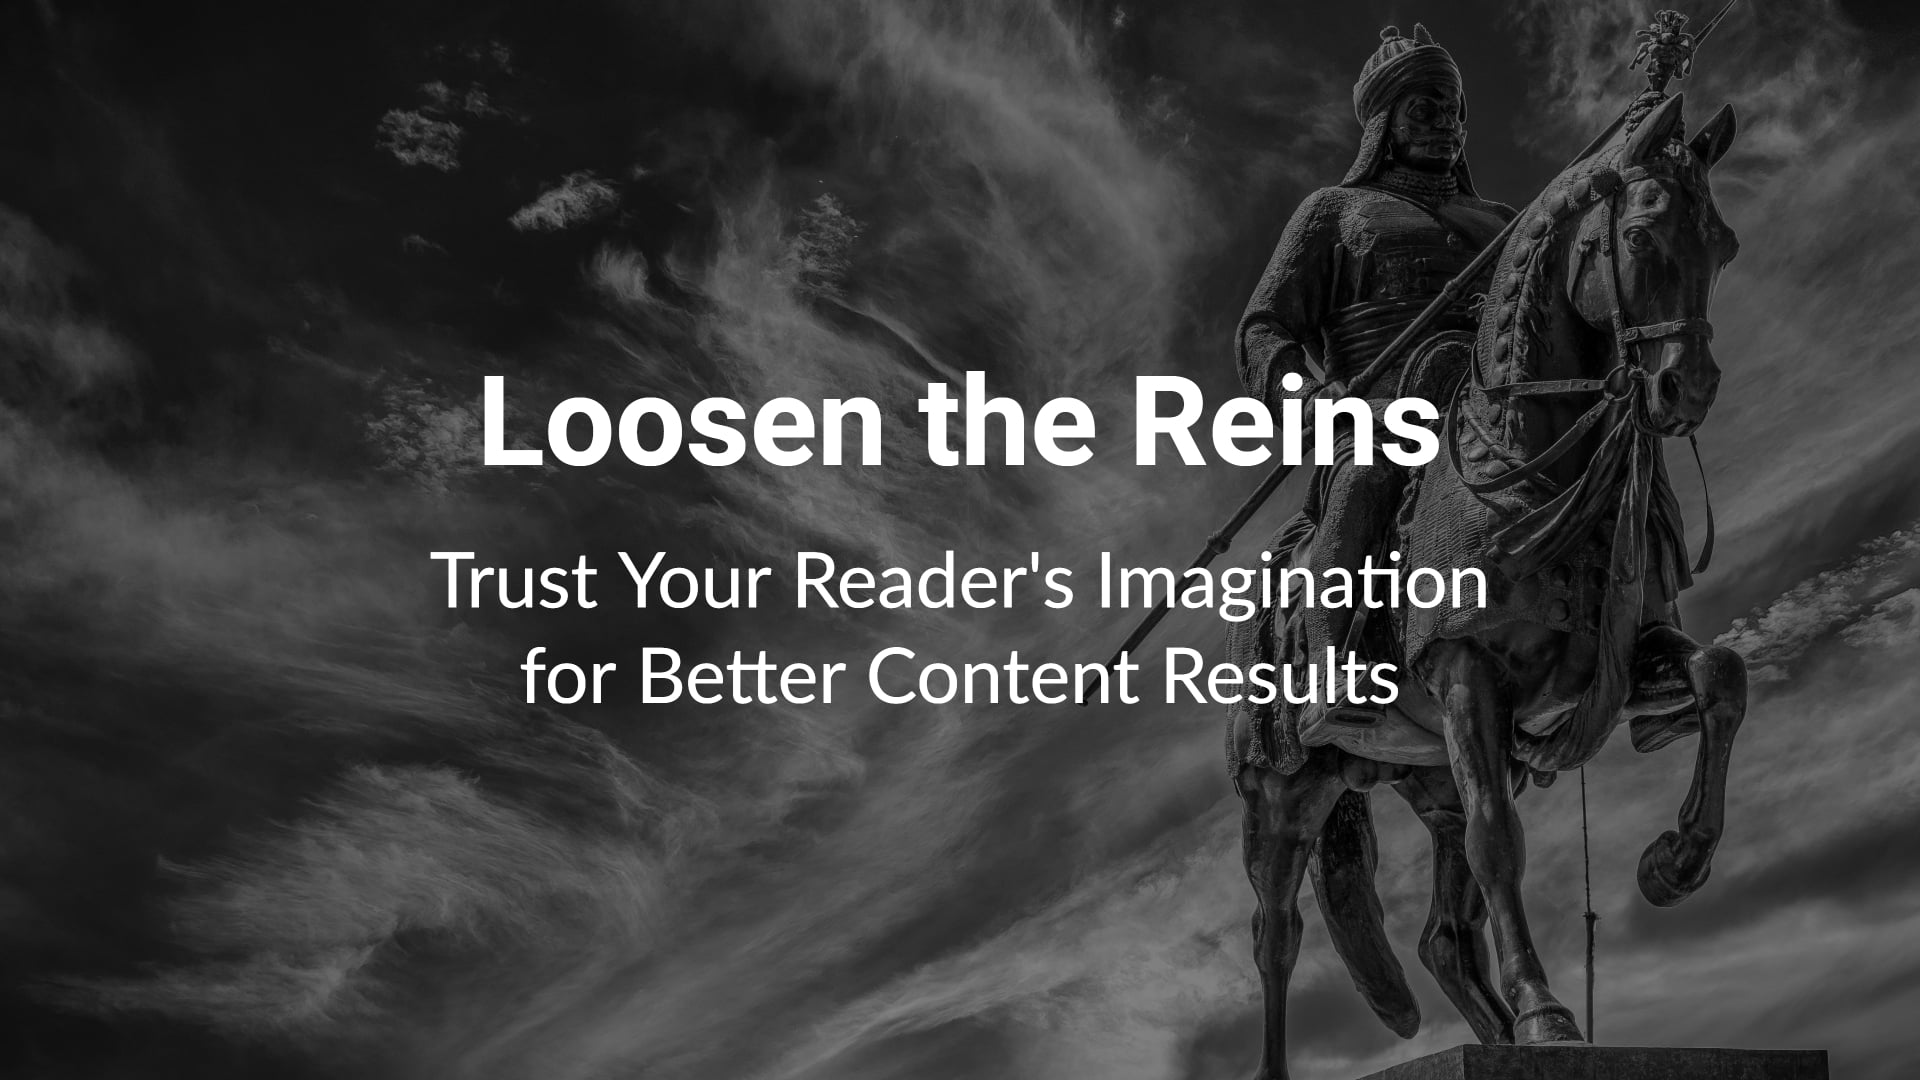 Loosen the Reins: Trust Your Reader's Imagination for Better Content Results - statue of person on horseback